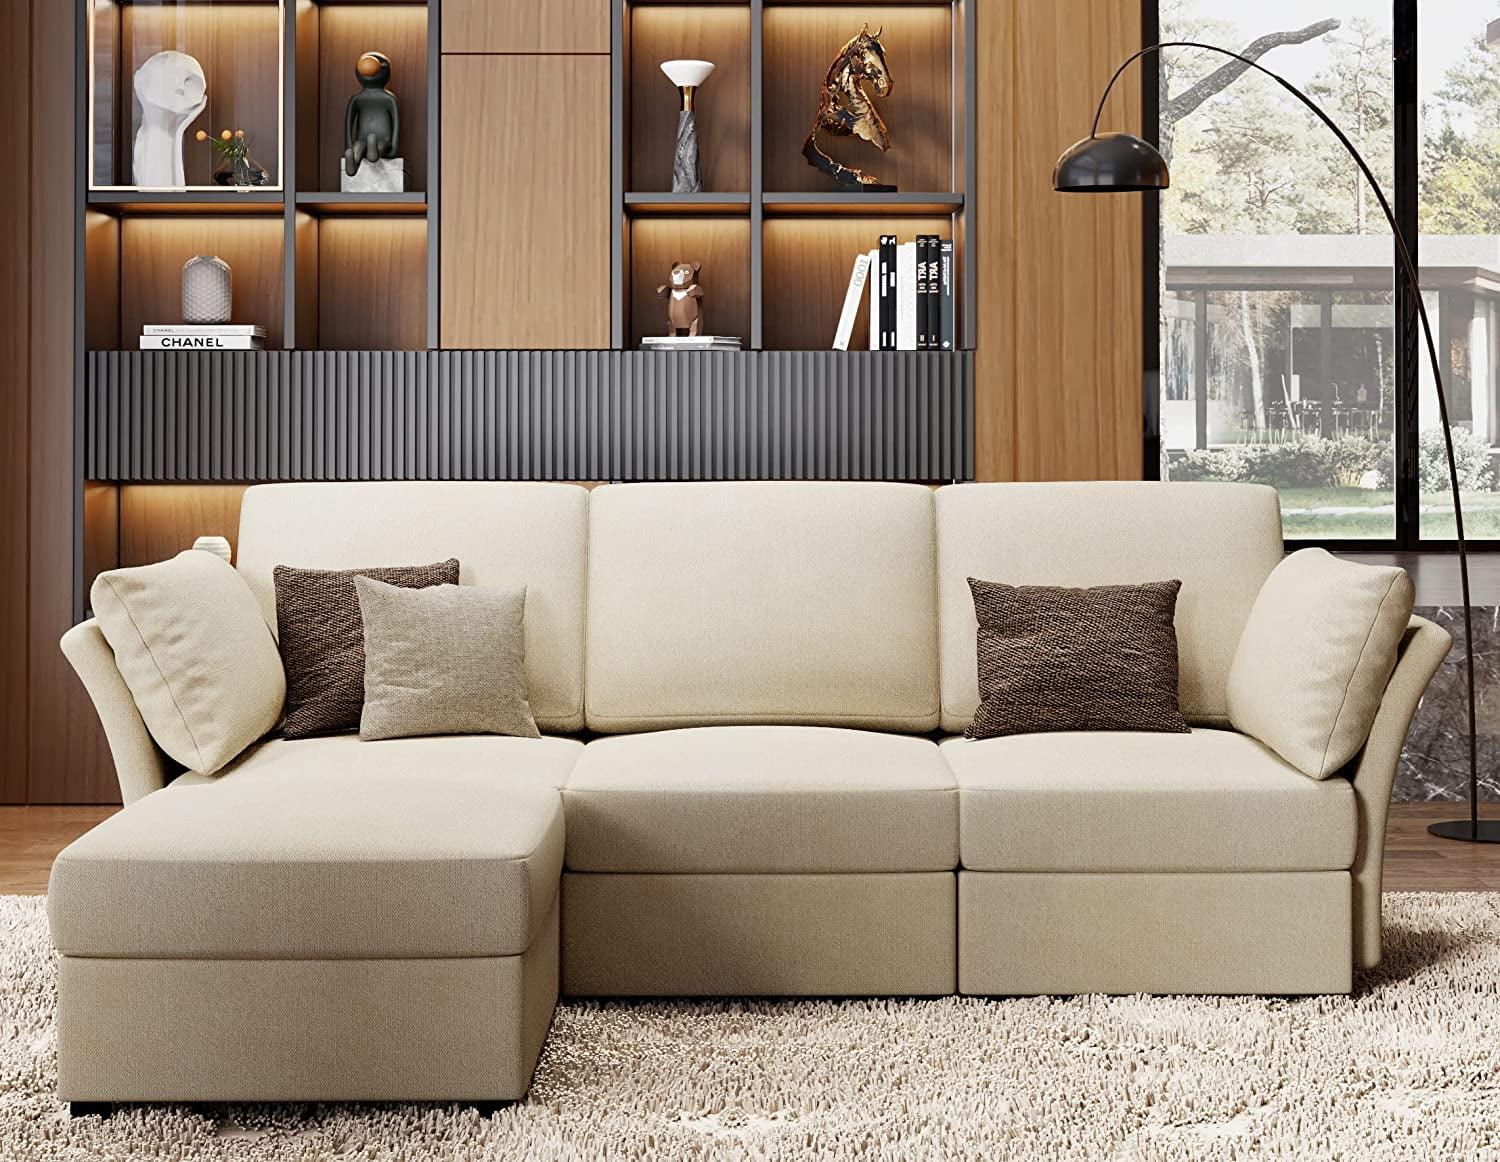 Amerlife Sectional Sofa, Modular Sectional Couch with Ottomans- 4 Seat ...